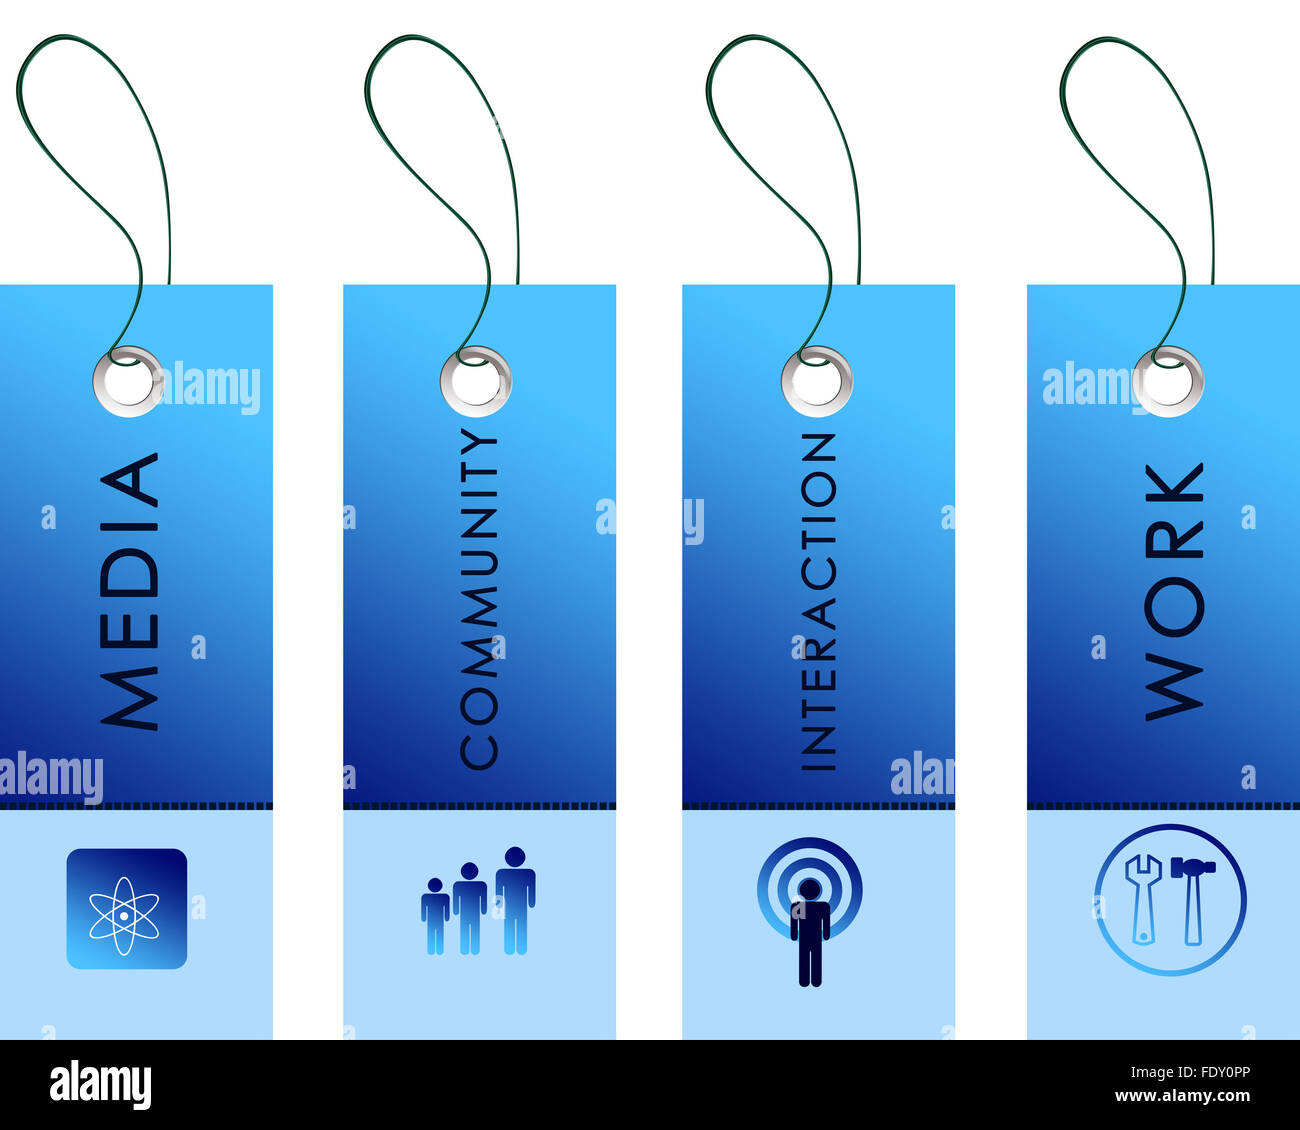 blue labels with communication terms on them Stock Photo